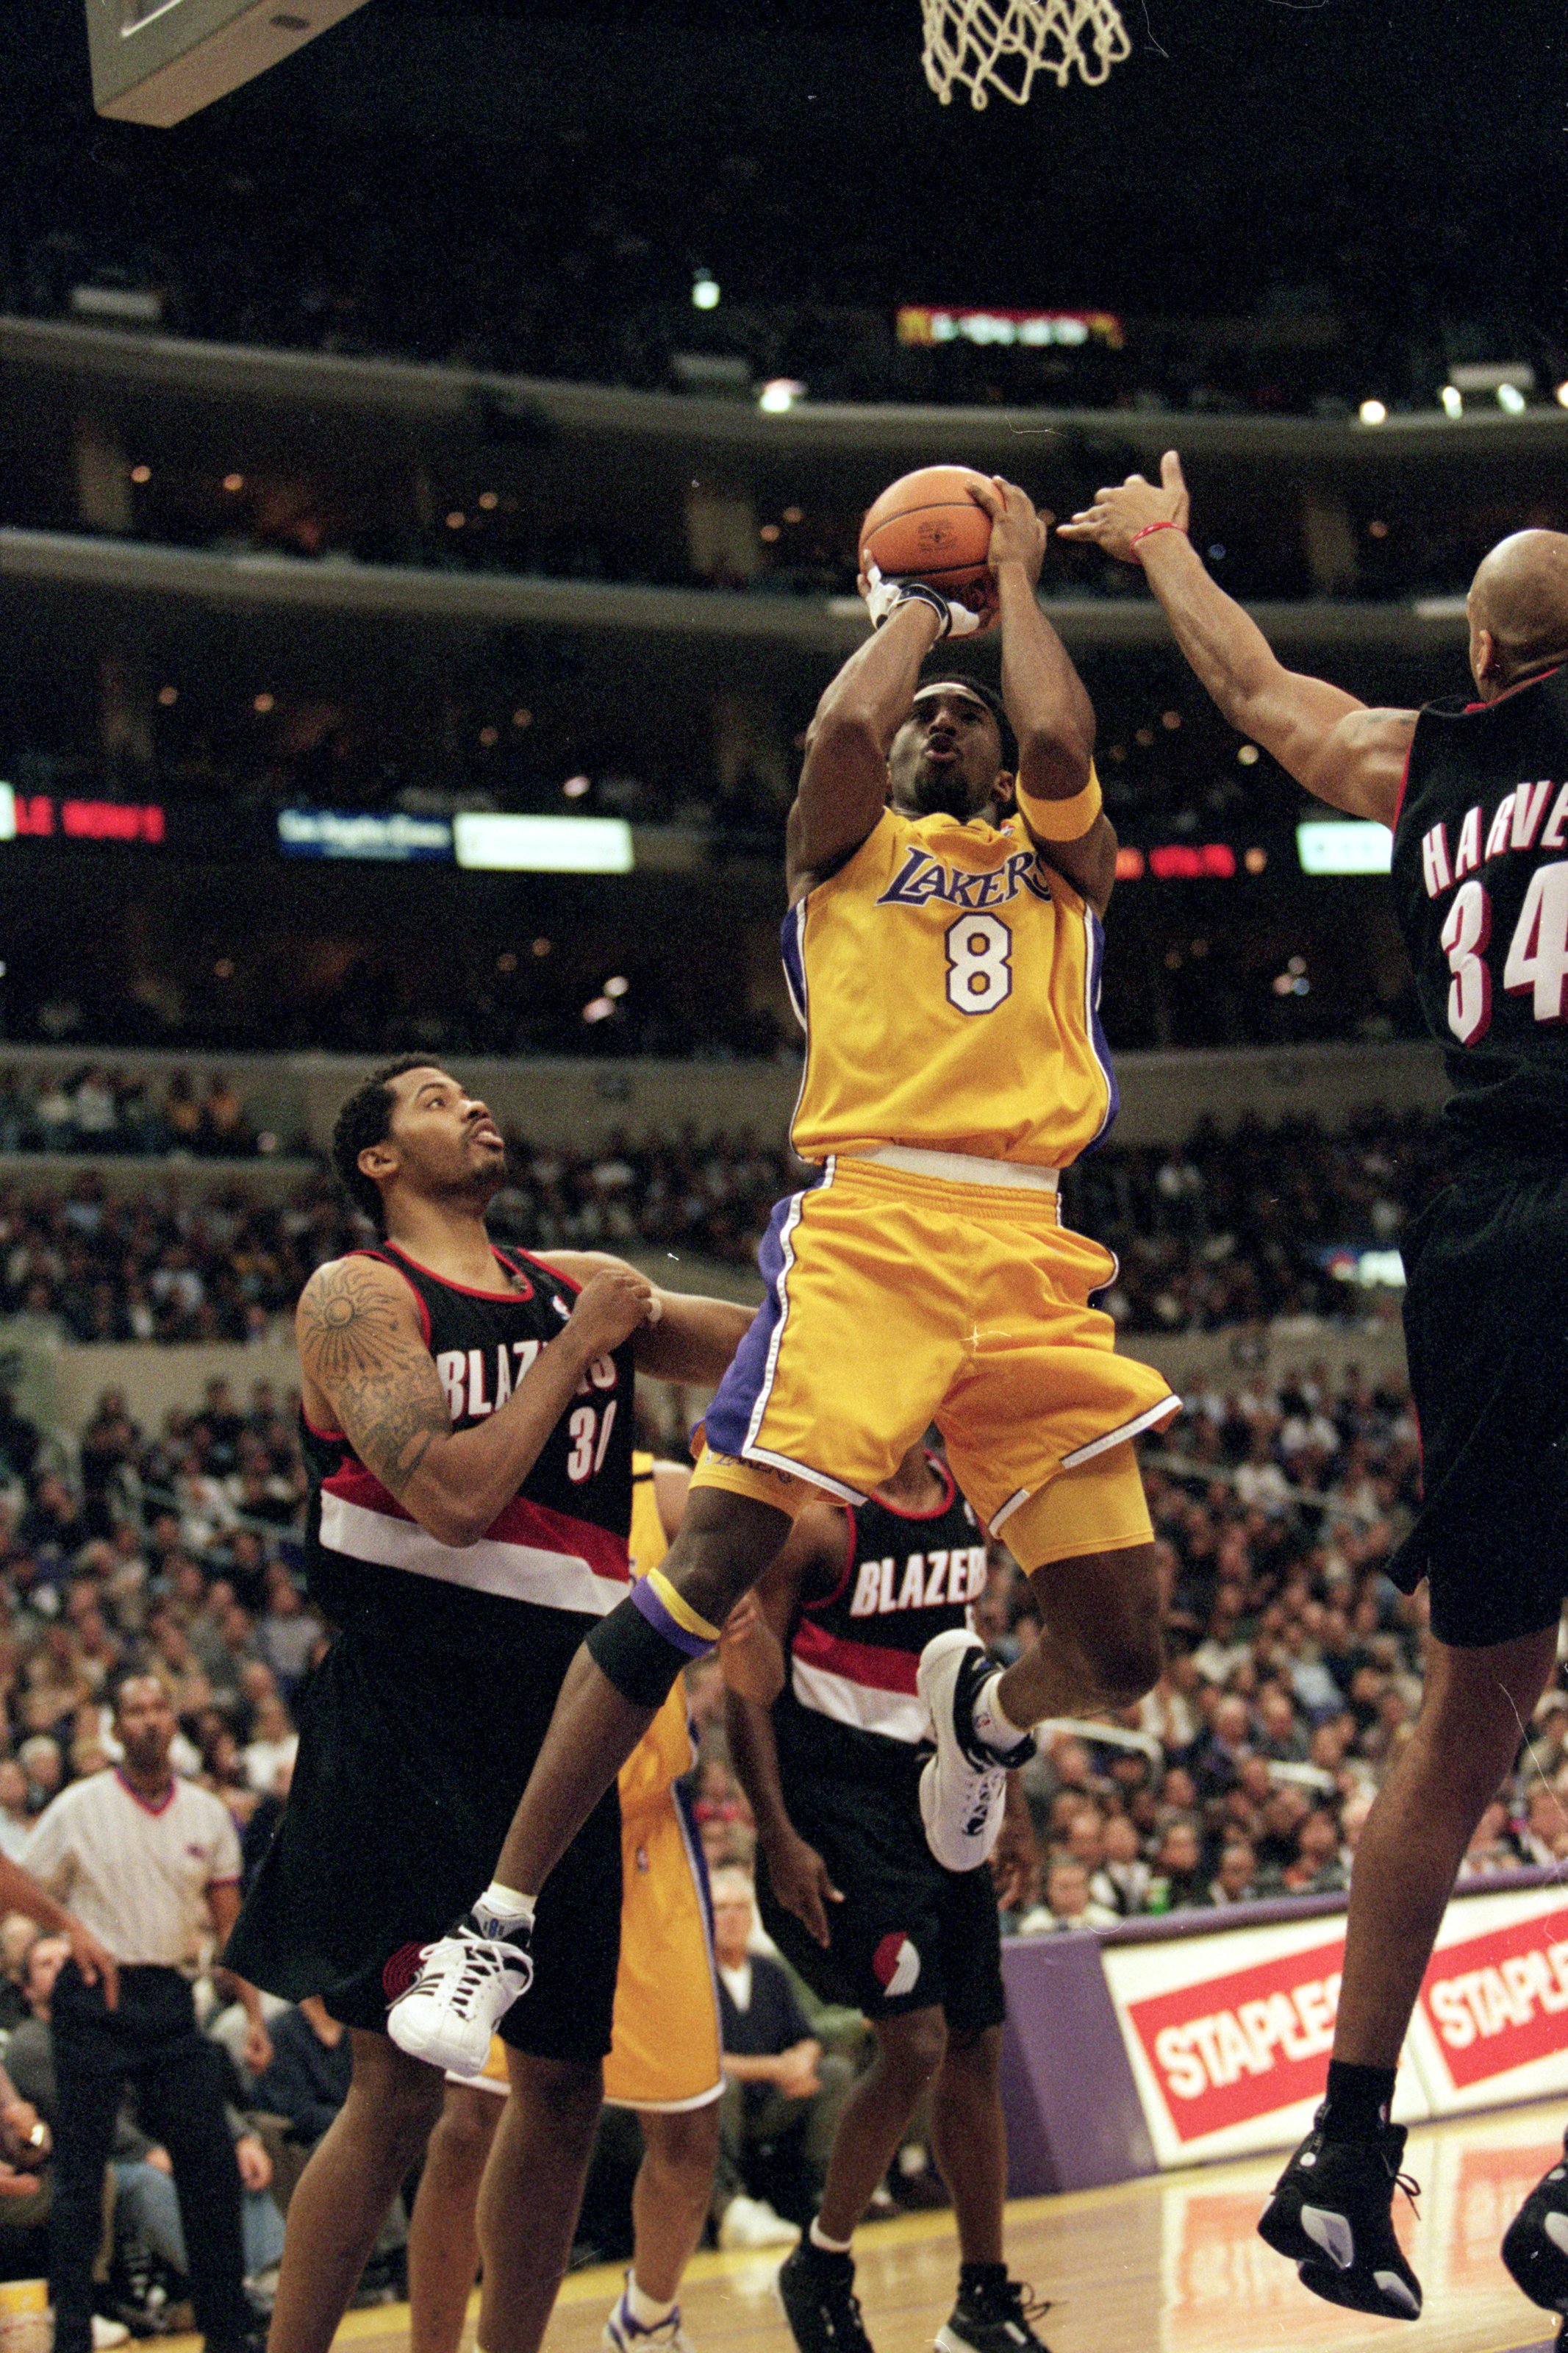 3 Dec 1999: Kobe Bryant #8 of the Los Angeles Lakers makes a jump shot during the game against the Portland TrailBlazers at the Staples Center in Los Angeles, California. The Lakers defeated the Blazers 93-80.  Mandatory Credit: Tom Hauck  /Allsport